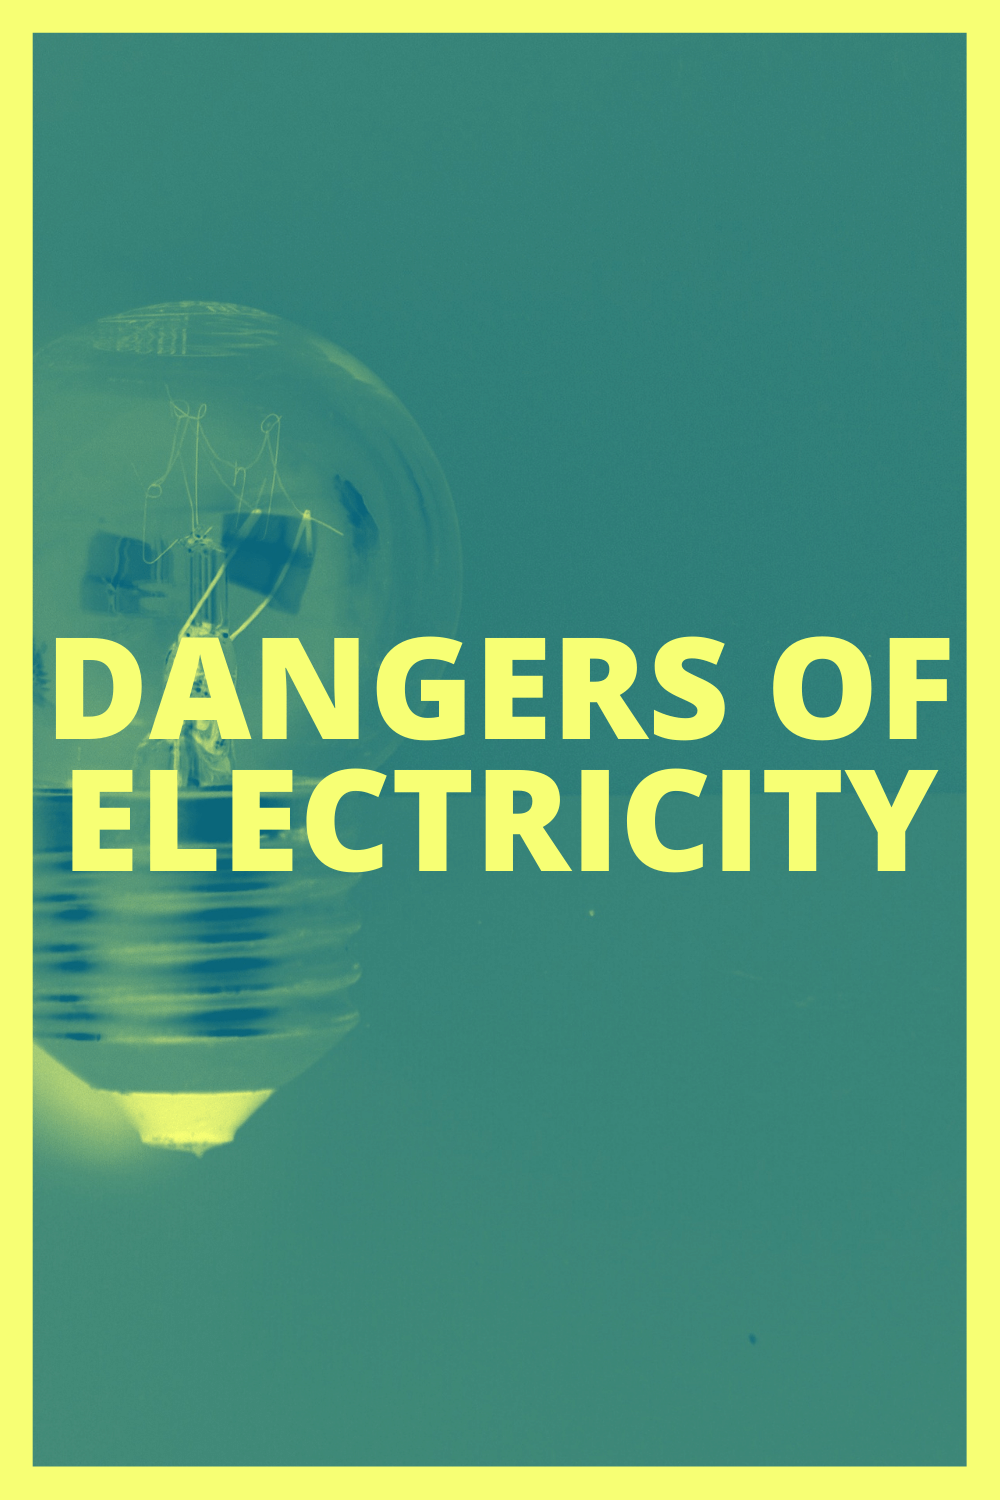 Dangers of Electricity To The Body: What You Need To Know